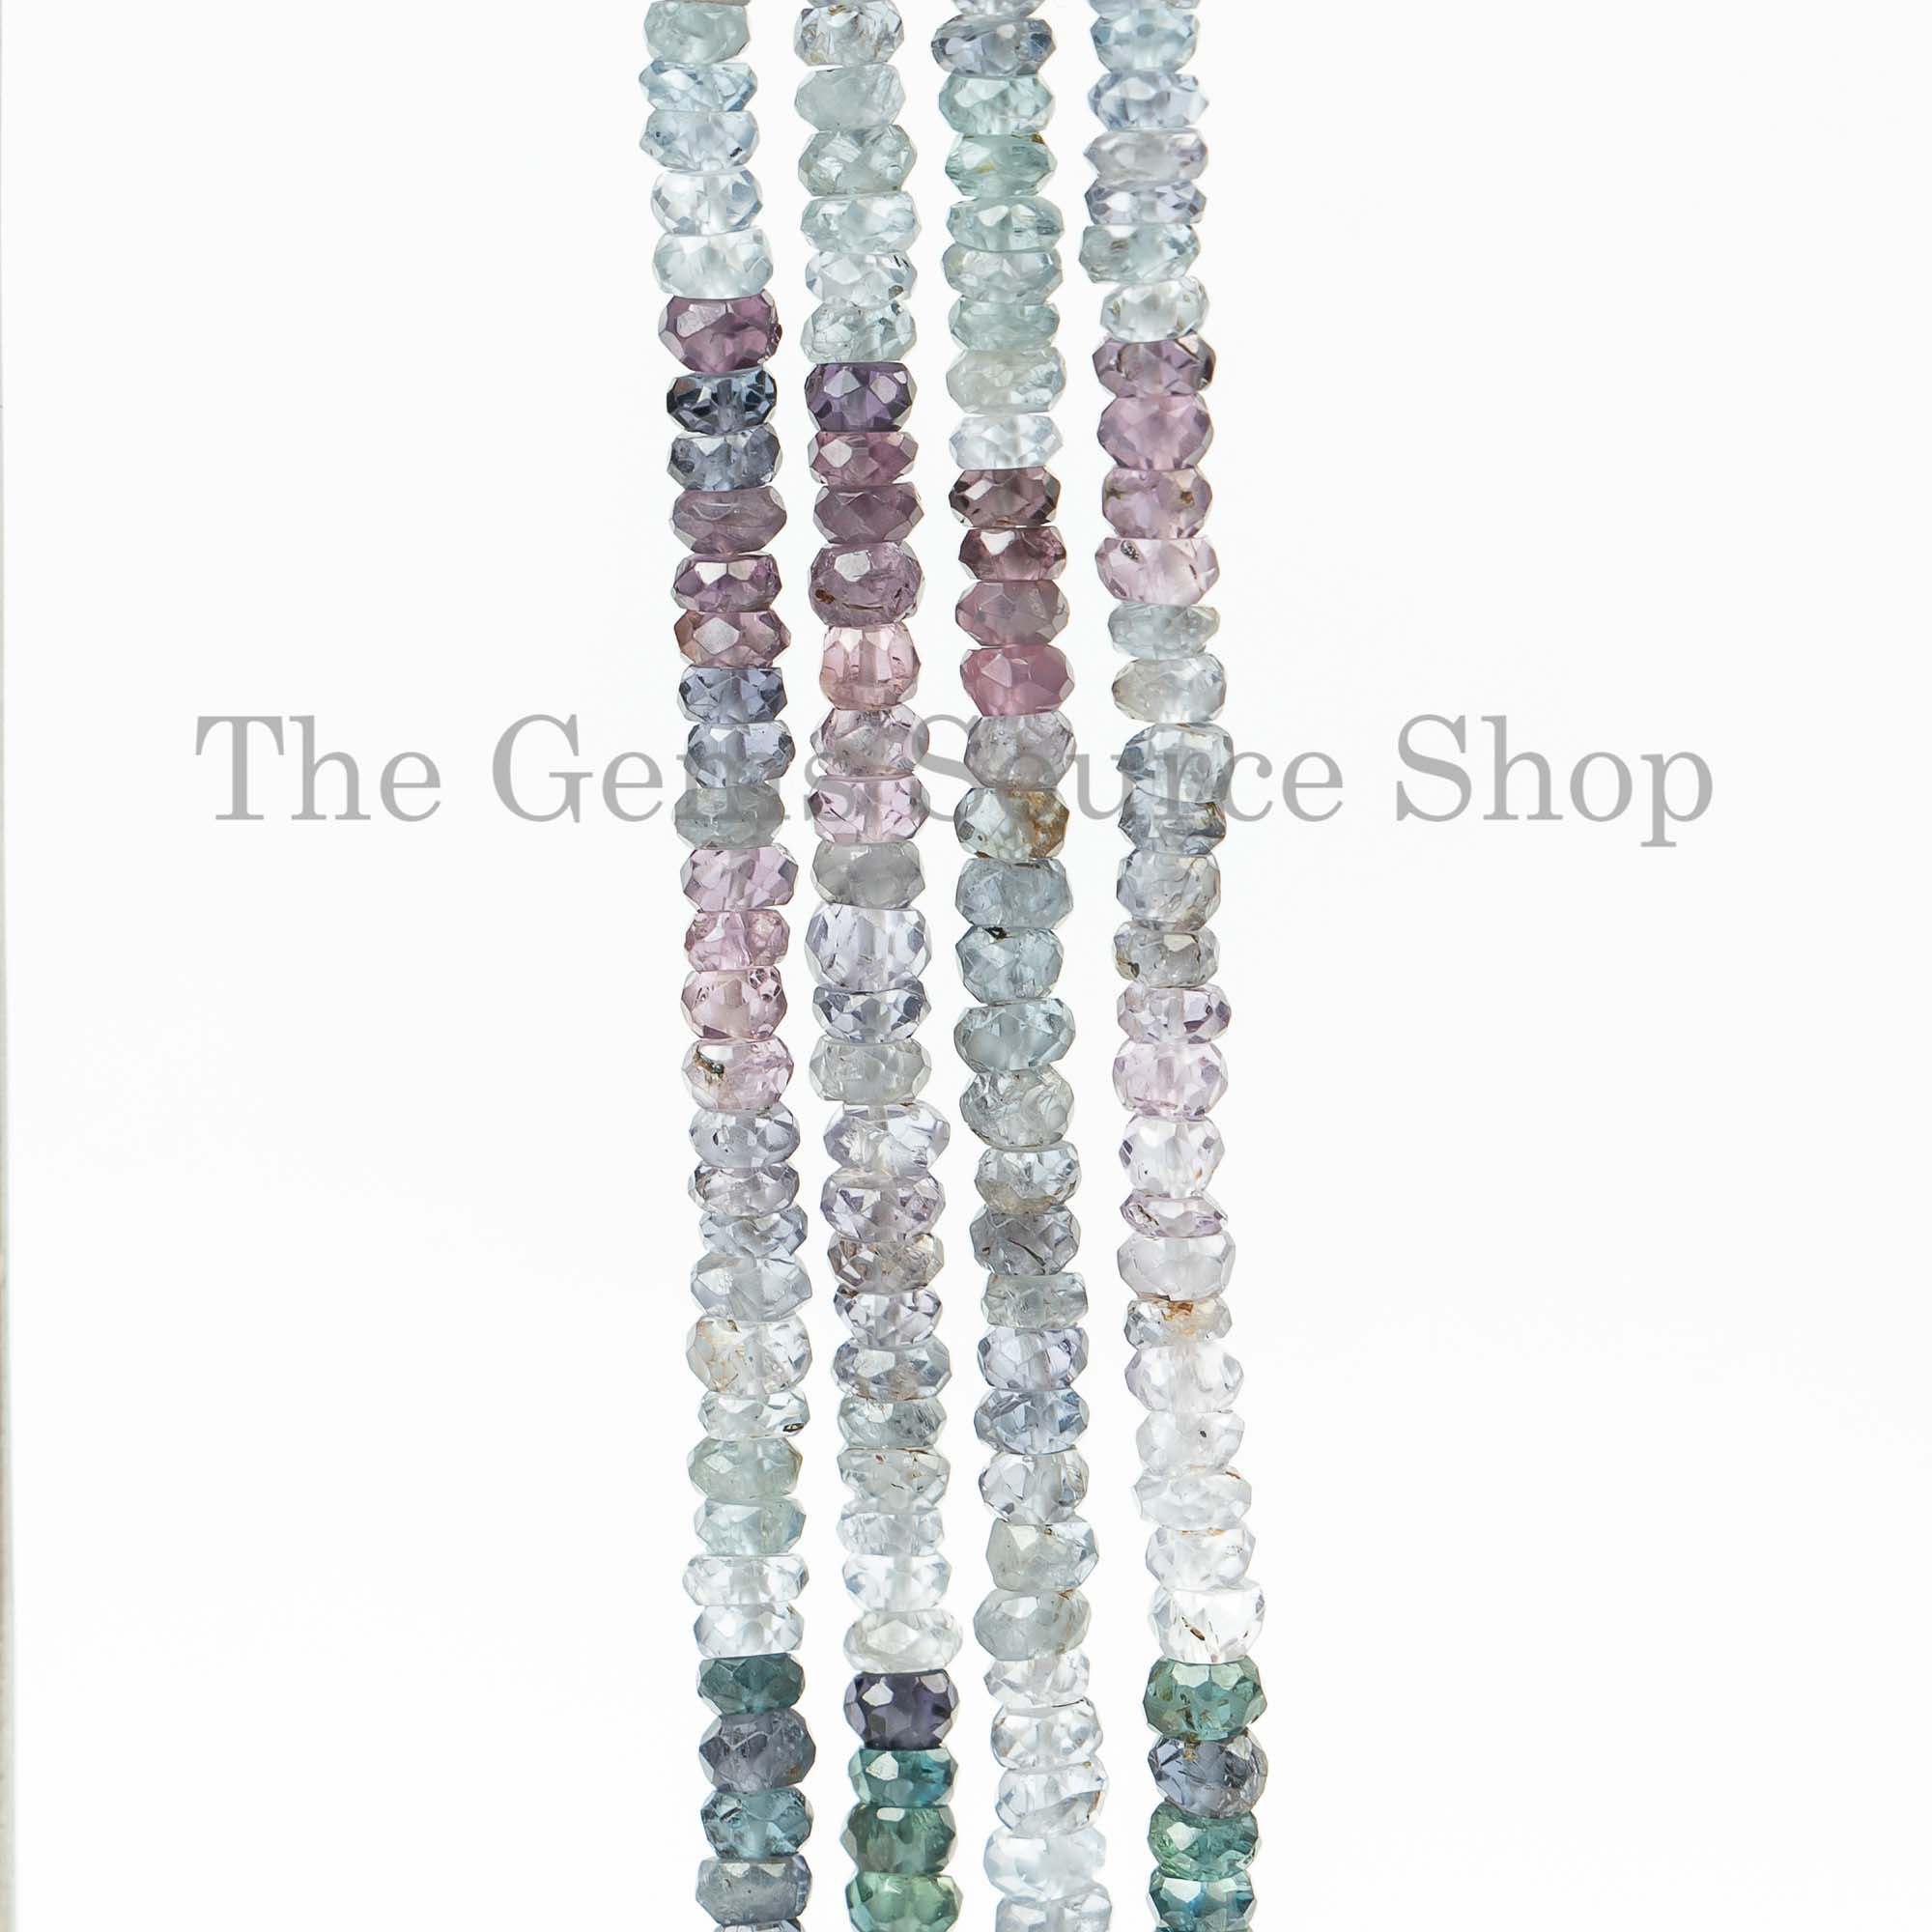 Multi Spinel Faceted Rondelle Shape Beads, Multi Spinel Faceted Beads, Multi Spinel Rondelle Beads